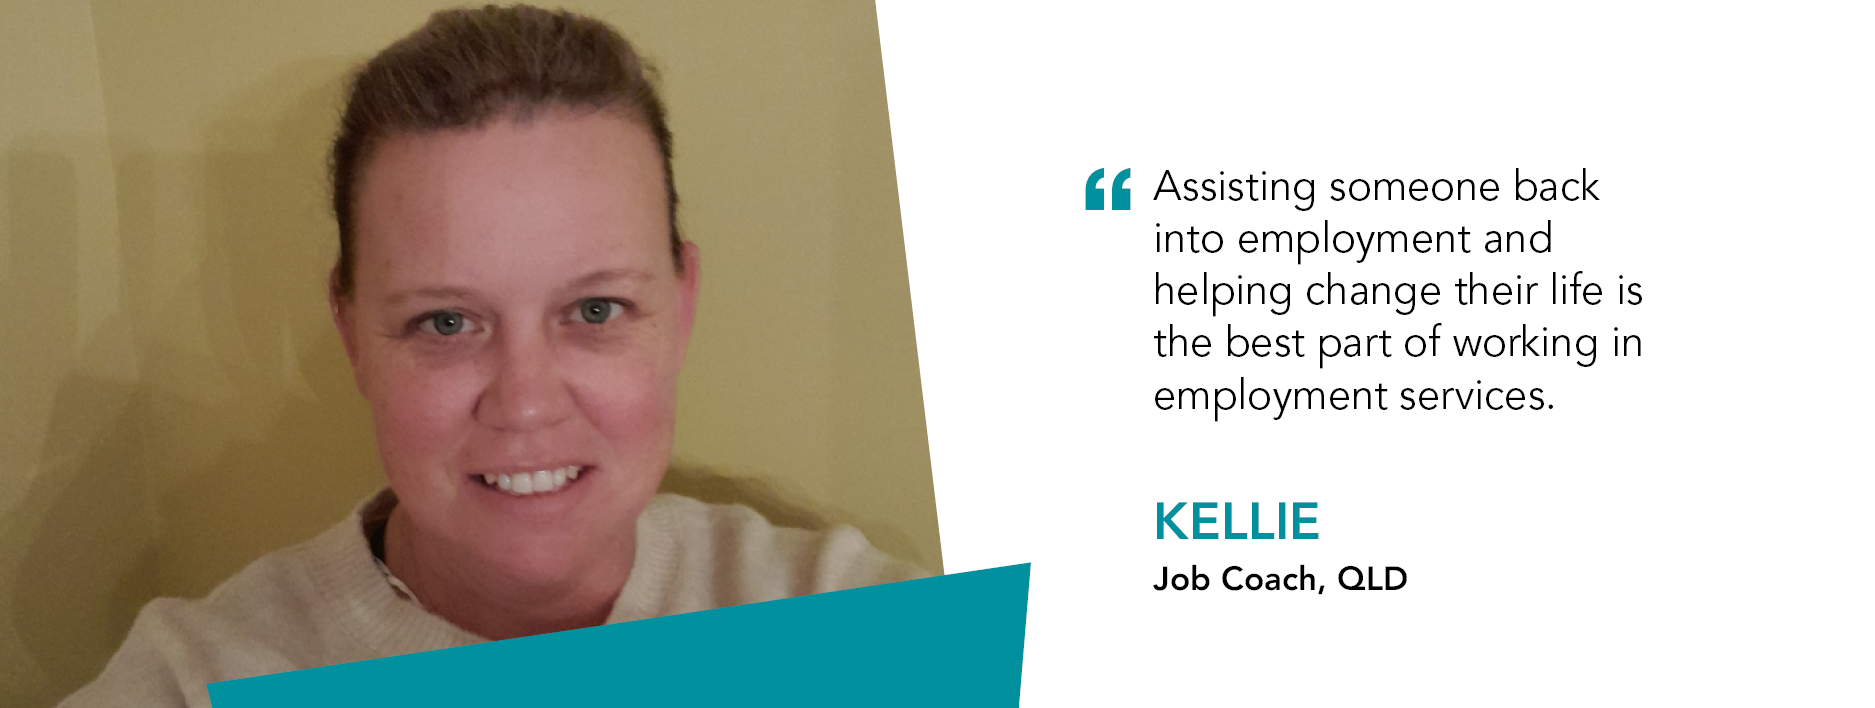 Quote reads " Assisting someone back into employment and helping change their life is the best part of working in employment services." Kellie, Job Coach QLD